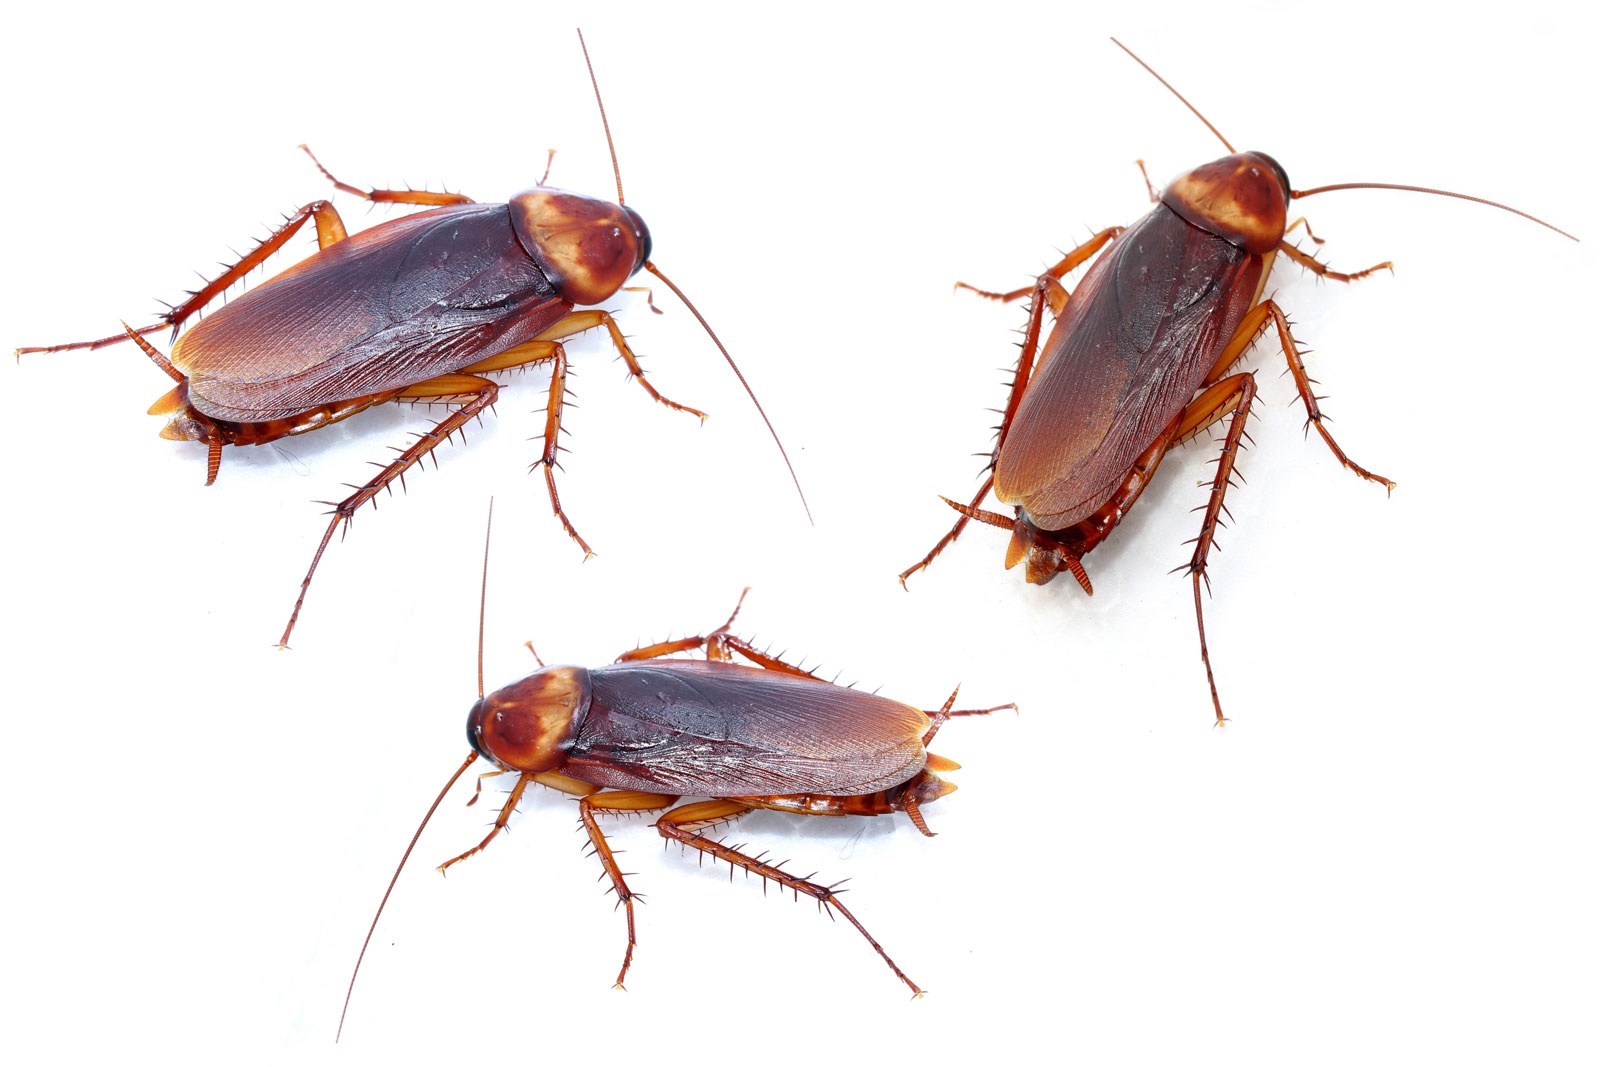 What do you call a bunch of cockroaches?